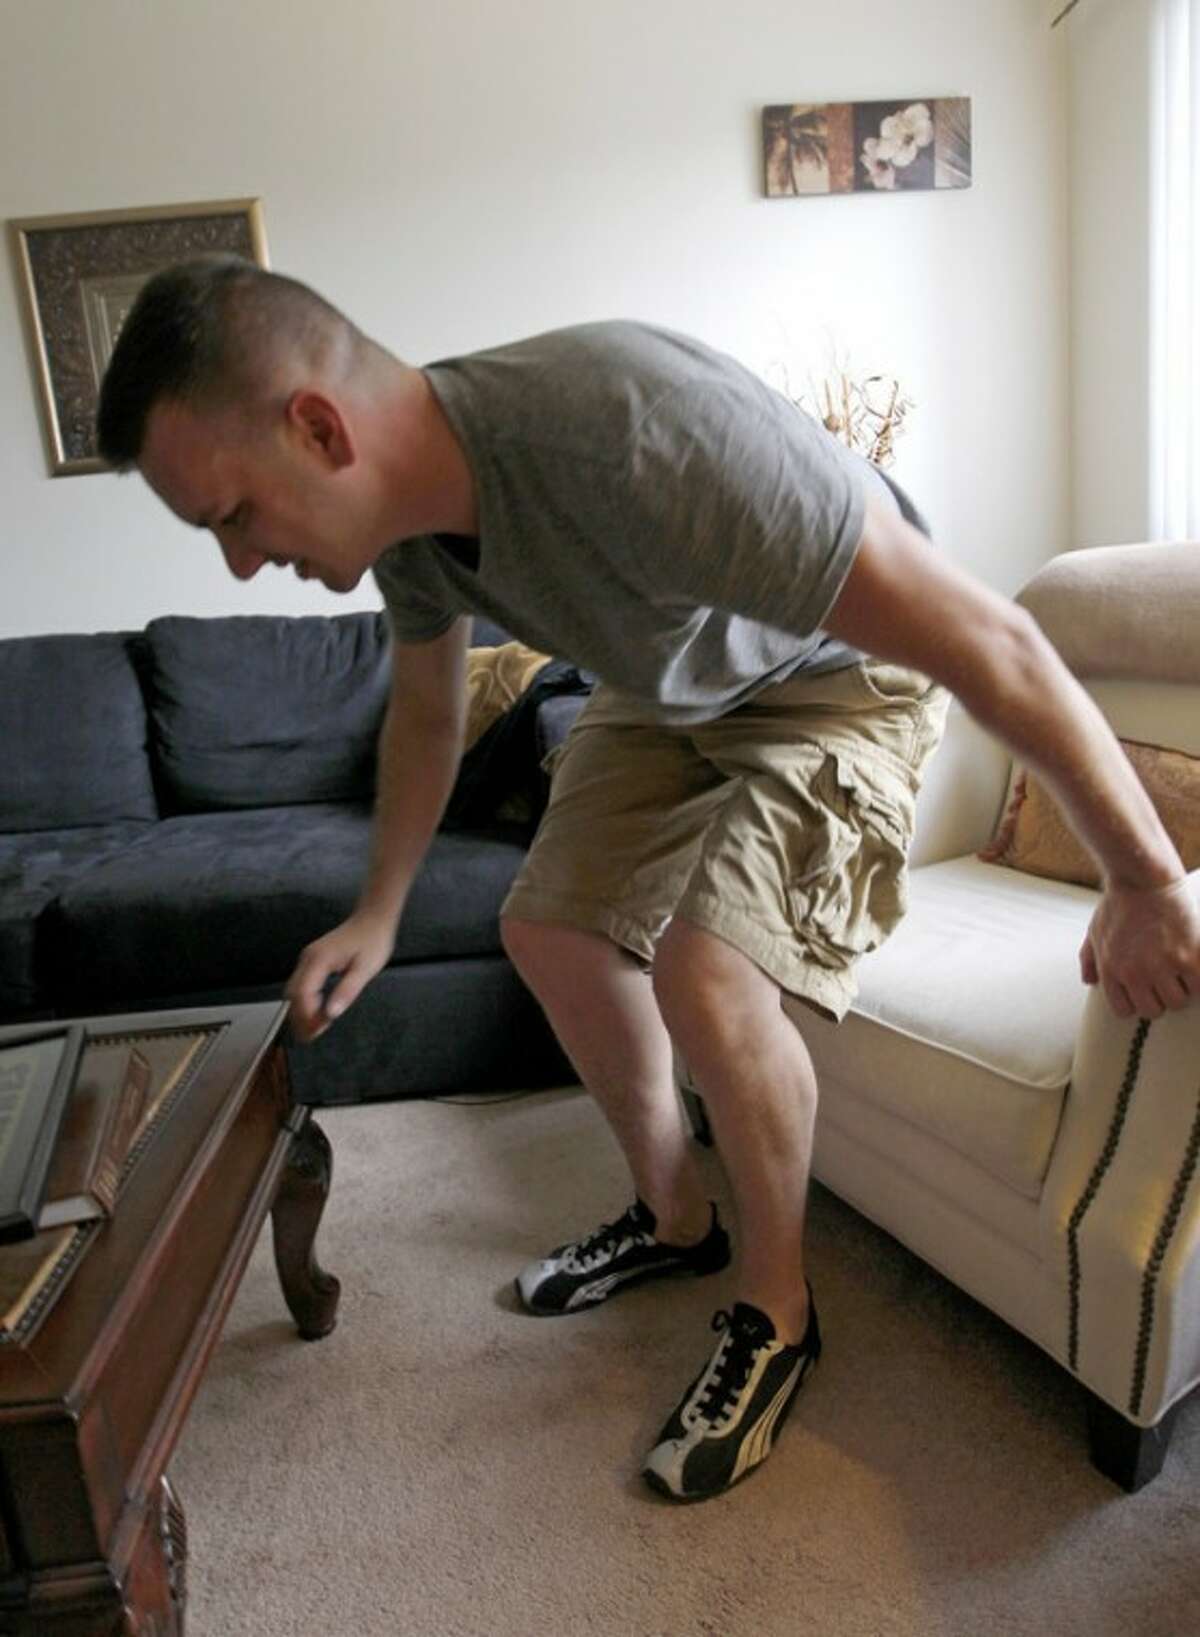 In this Monday, Aug. 20, 2012 photo, Marine Sgt. Ron Strang gets up from a chair in the living room of his home in Jefferson Hills, Pa. just south of Pittsburgh. He lost half of his left thigh muscle in a bomb blast in Afghanistan and with an experimental implant of connective tissue developed from pigs, it has had it strengthened. "It's been a huge improvement," he says. (AP Photo/Keith Srakocic)